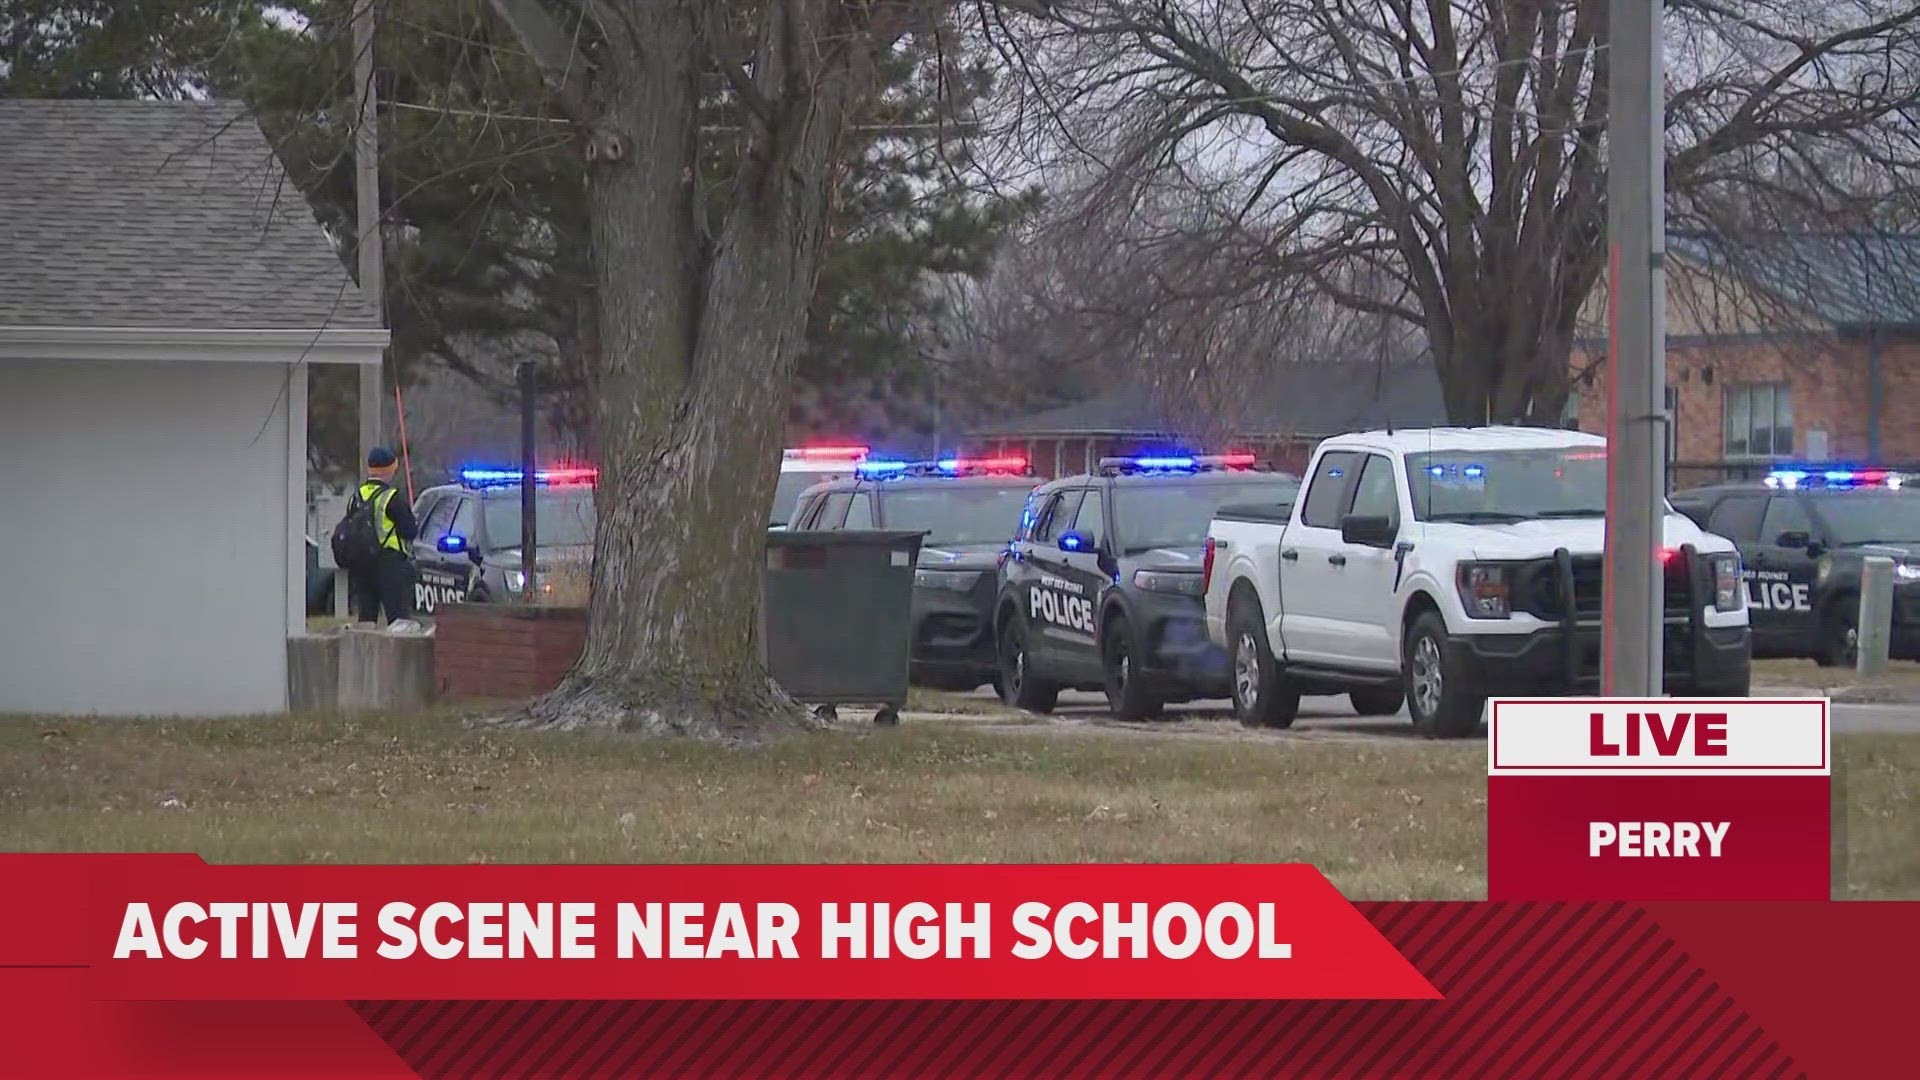 Local 5's Meghan MacPherson is on the scene trying to learn more about the morning's events at Perry High School in Perry, Iowa.